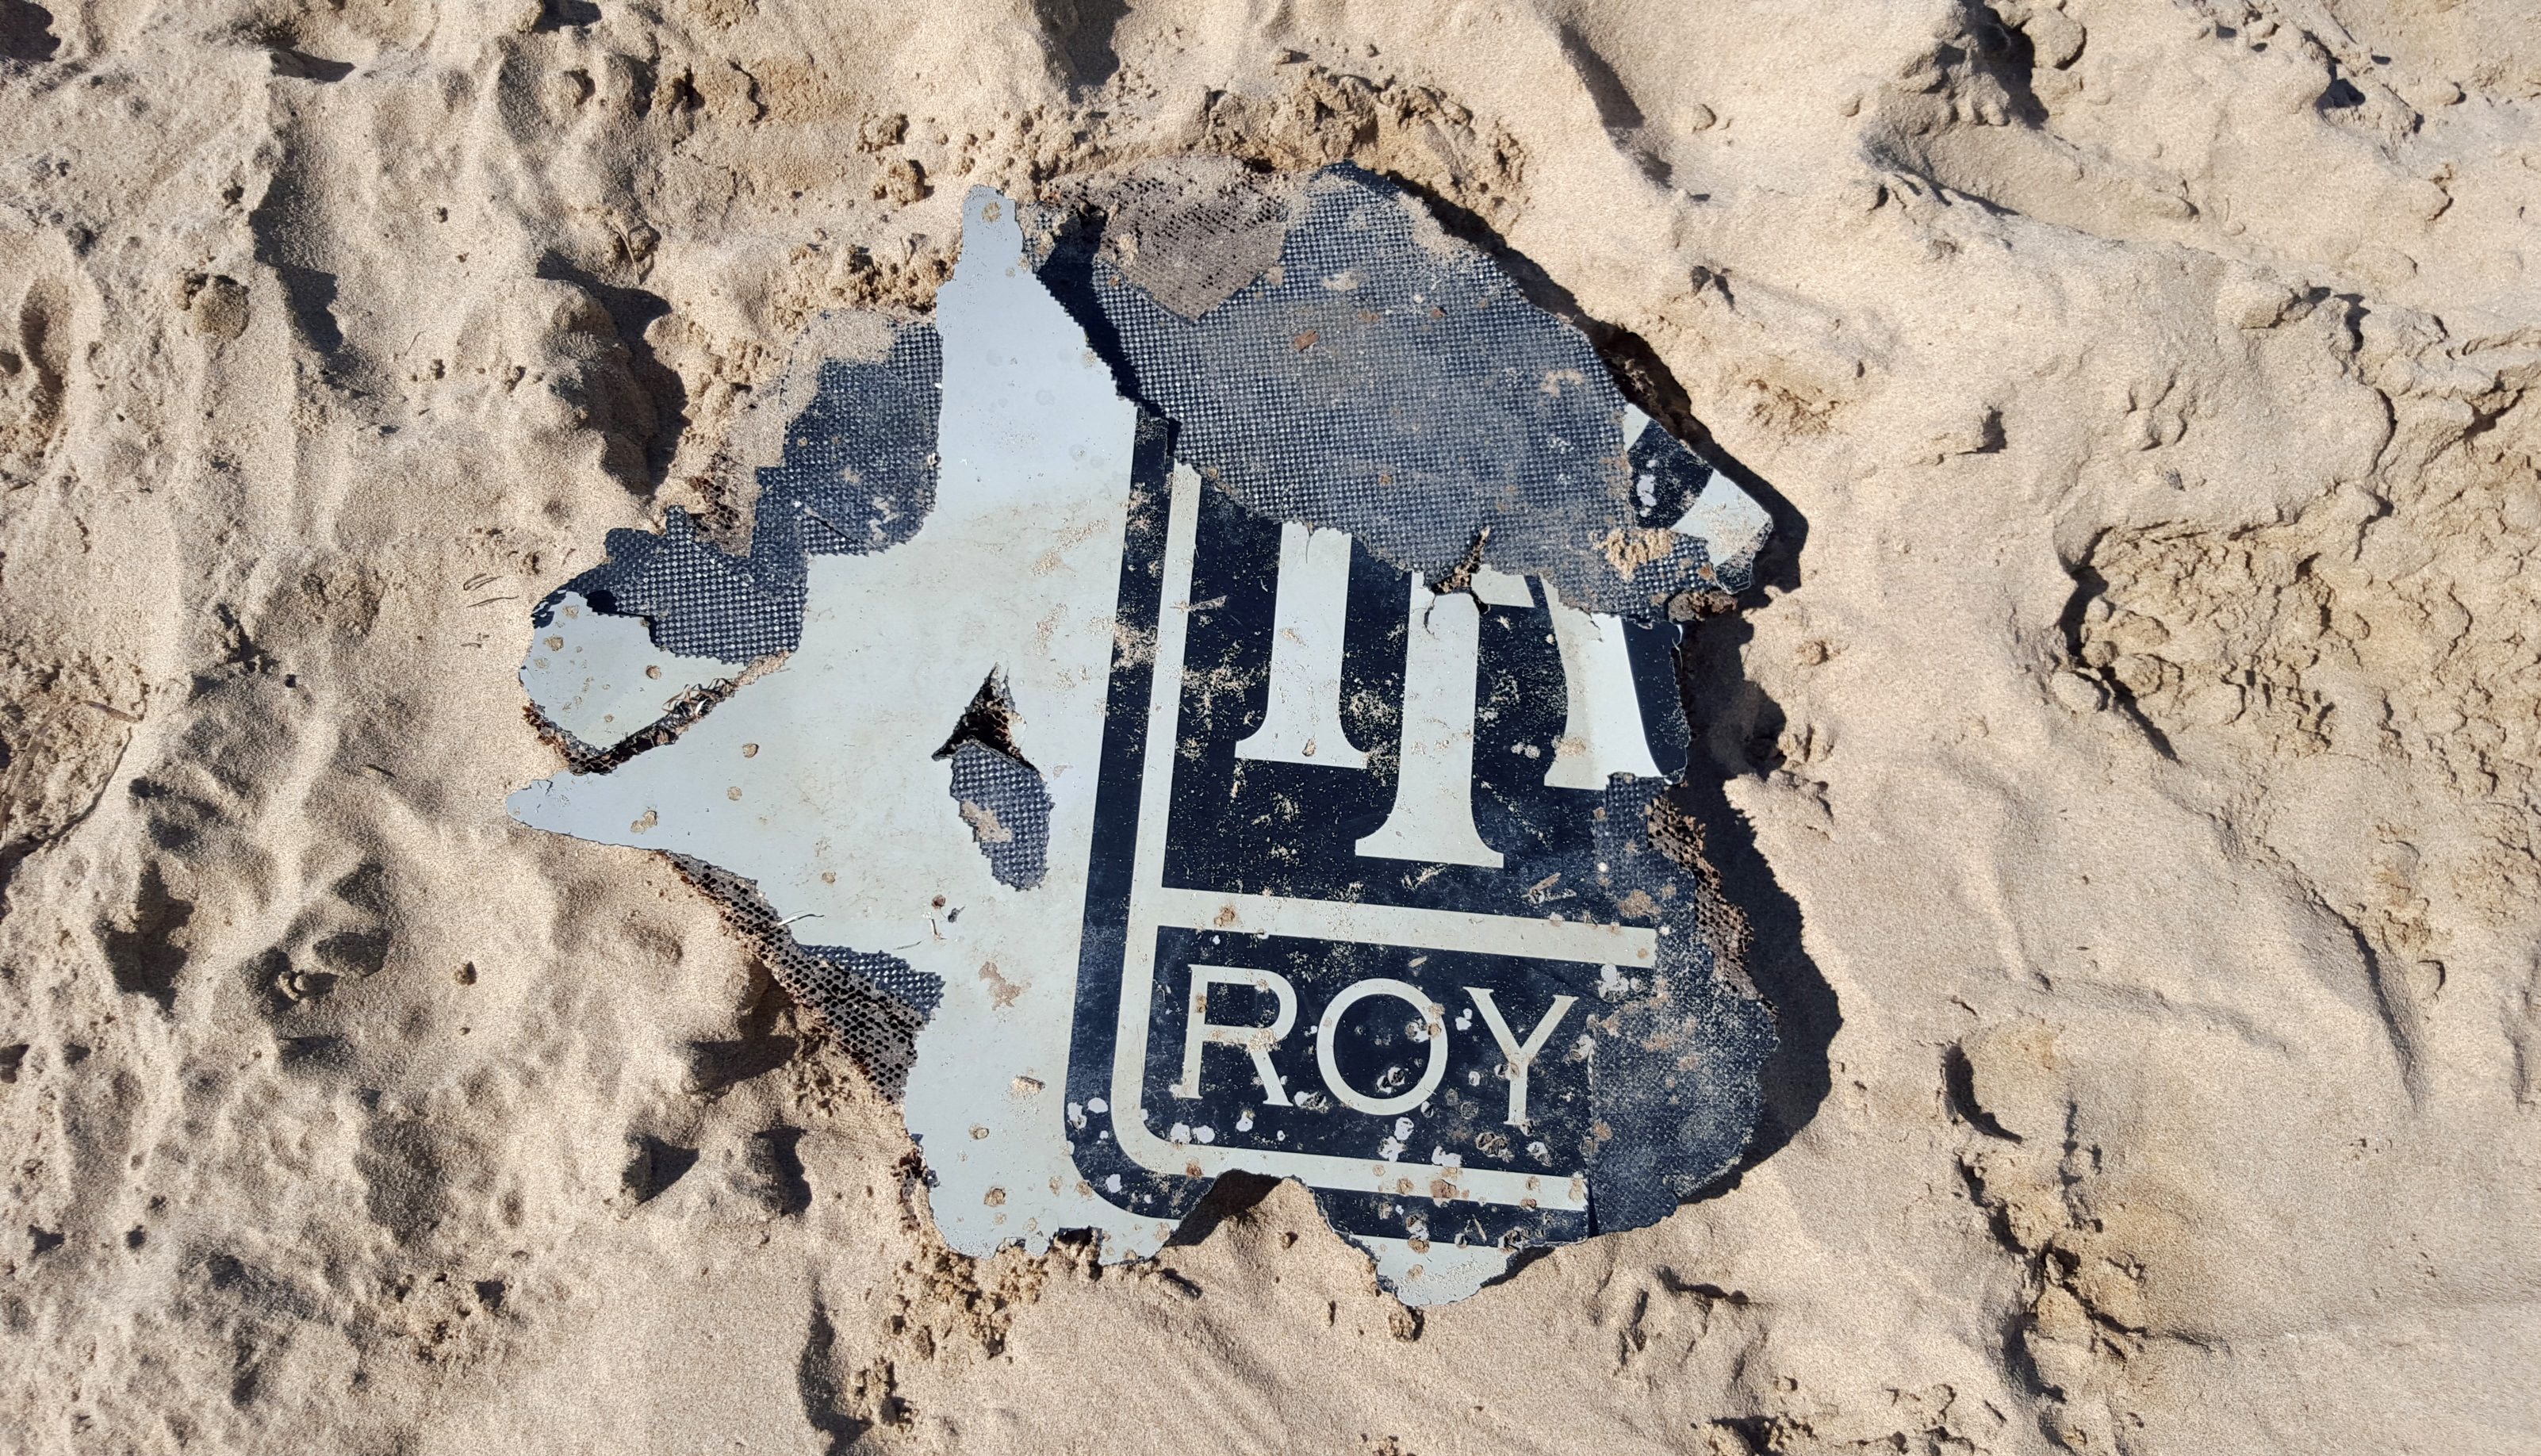 Photo taken on March 21, 2016 at Klein Brak River near Mossel Bay, shows a piece of suspected aircraft wreckage found off the east African coast of Mozambique. Two pieces of debris found in Mozambique are "almost certainly" from MH370, Australia says, after technical analysis of the wreckage that provides the latest clue to the fate of the missing Malaysian Airlines Boeing 777. / AFP PHOTO / Neels Kruger / RESTRICTED TO EDITORIAL USE - MANDATORY CREDIT "AFP PHOTO / NEELS KRUGER" - NO MARKETING NO ADVERTISING CAMPAIGNS - DISTRIBUTED AS A SERVICE TO CLIENTS